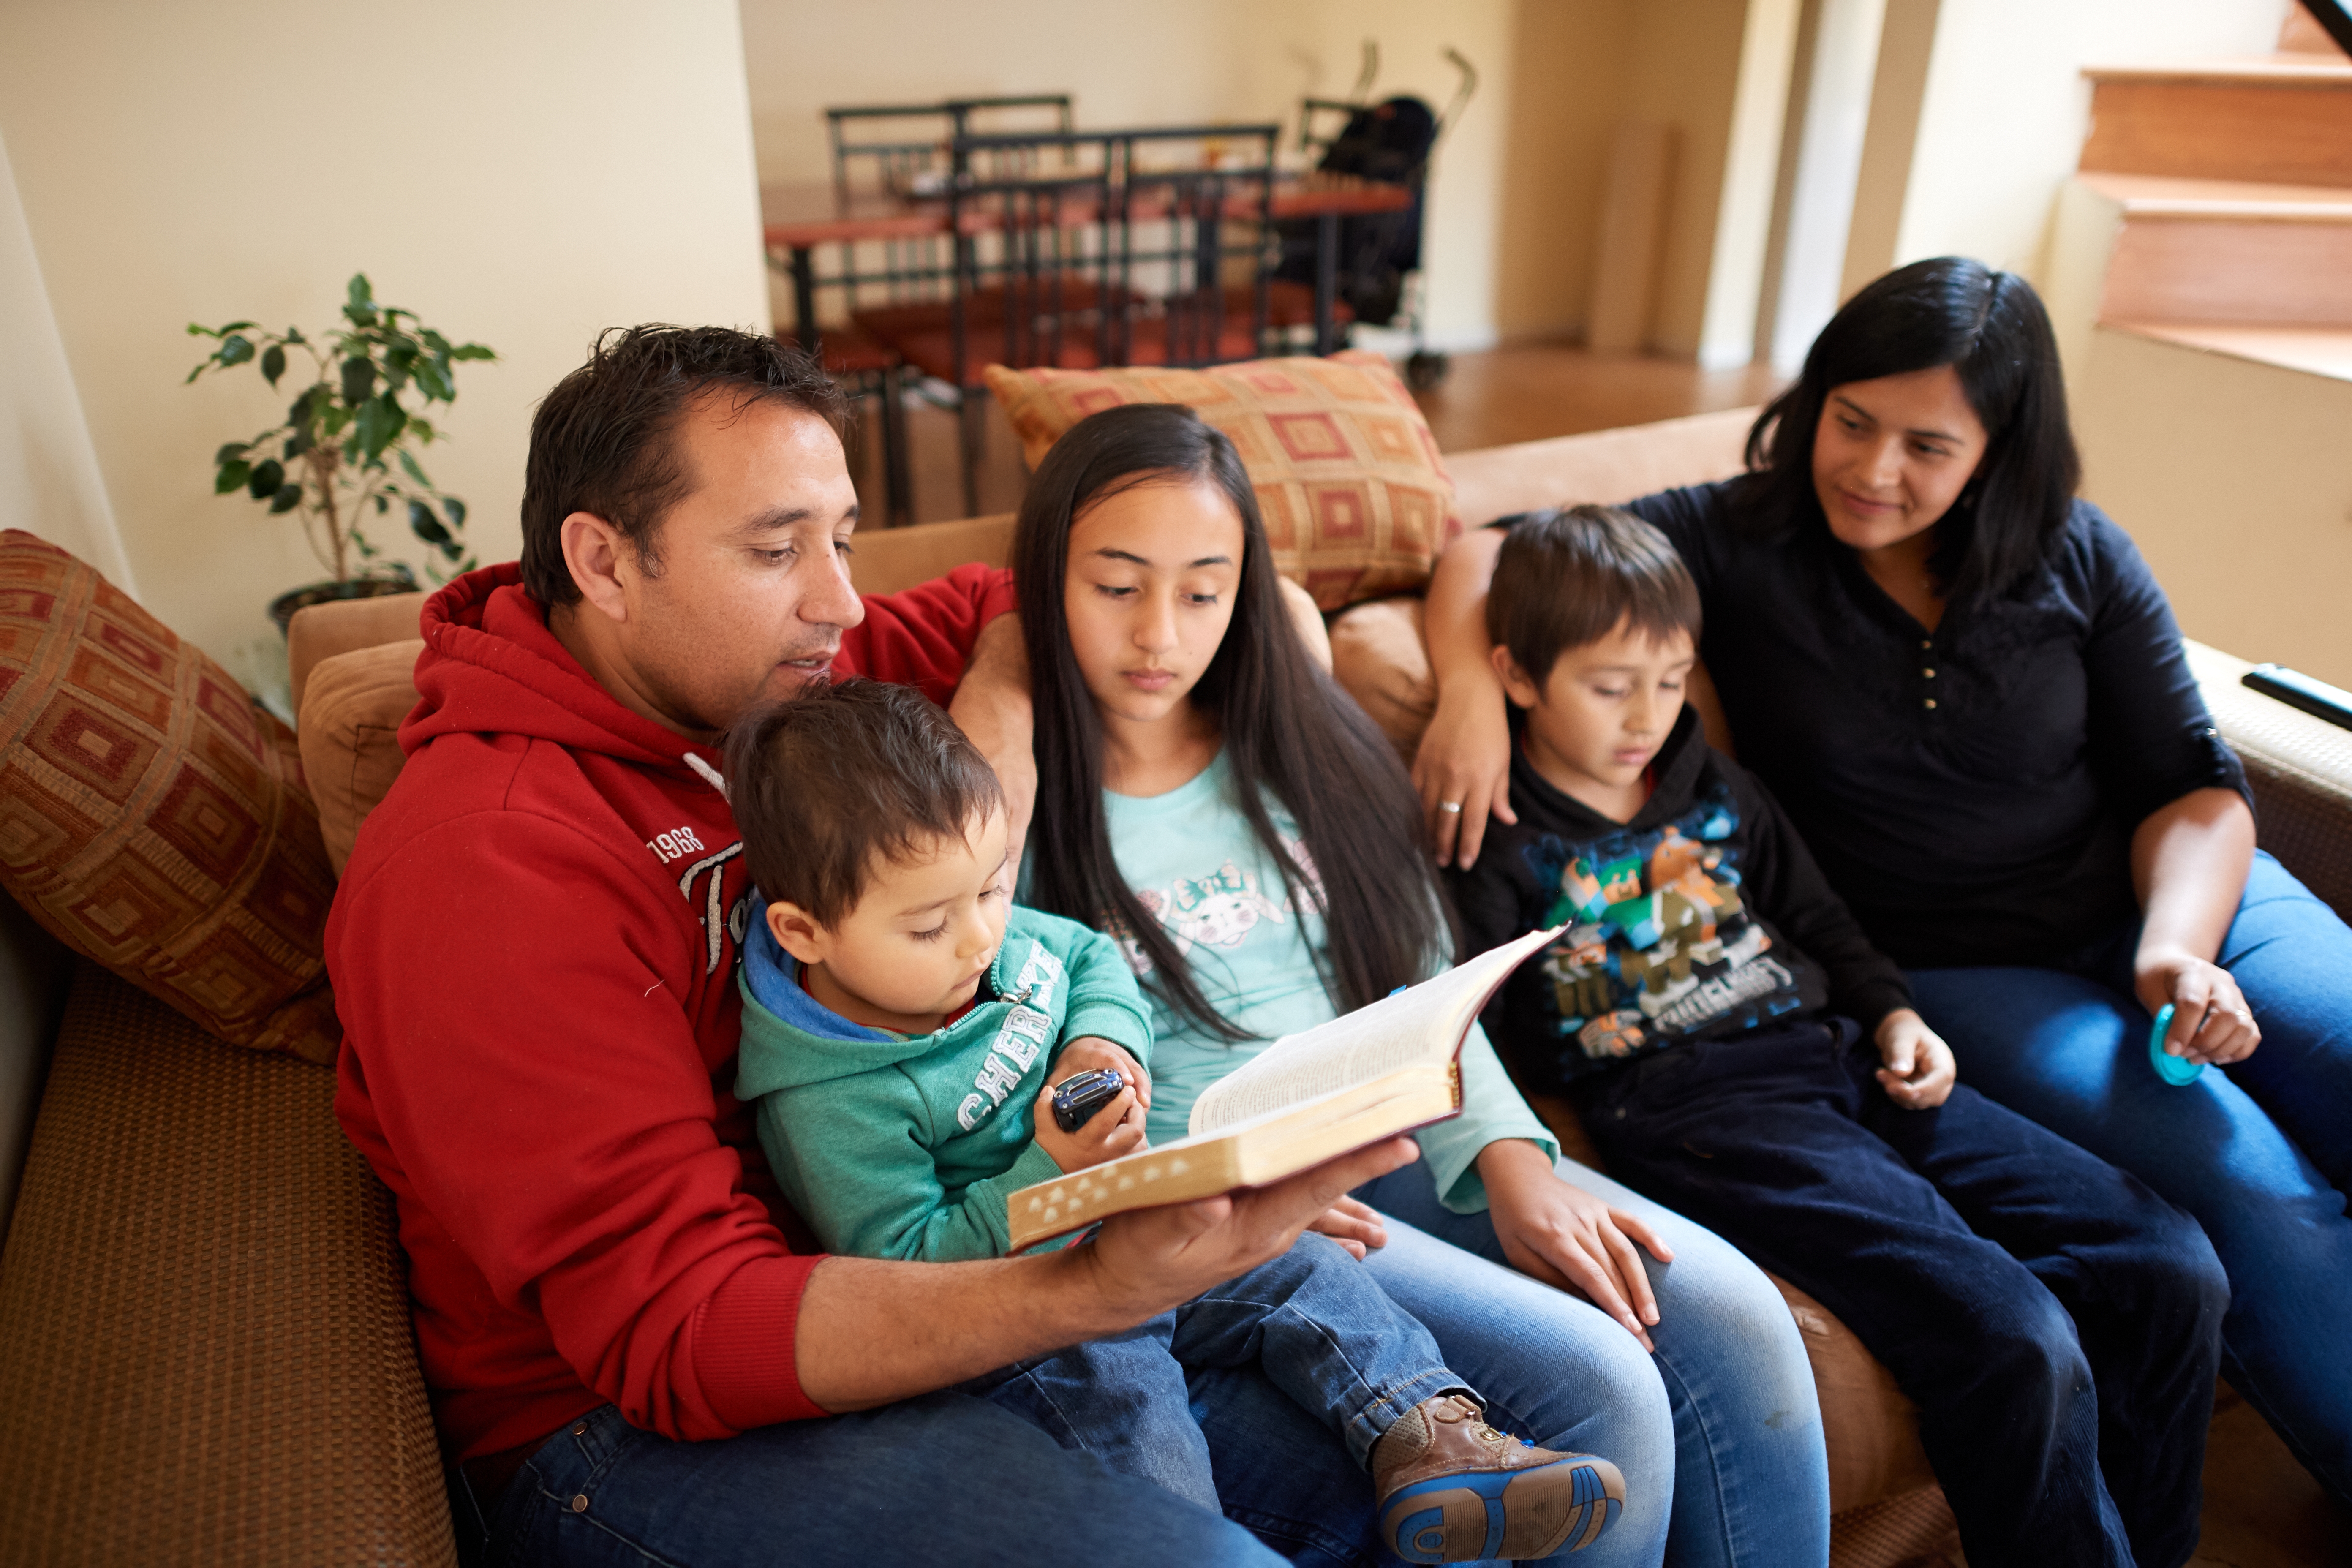 A family sits together on a couch and reads the scriptures together.